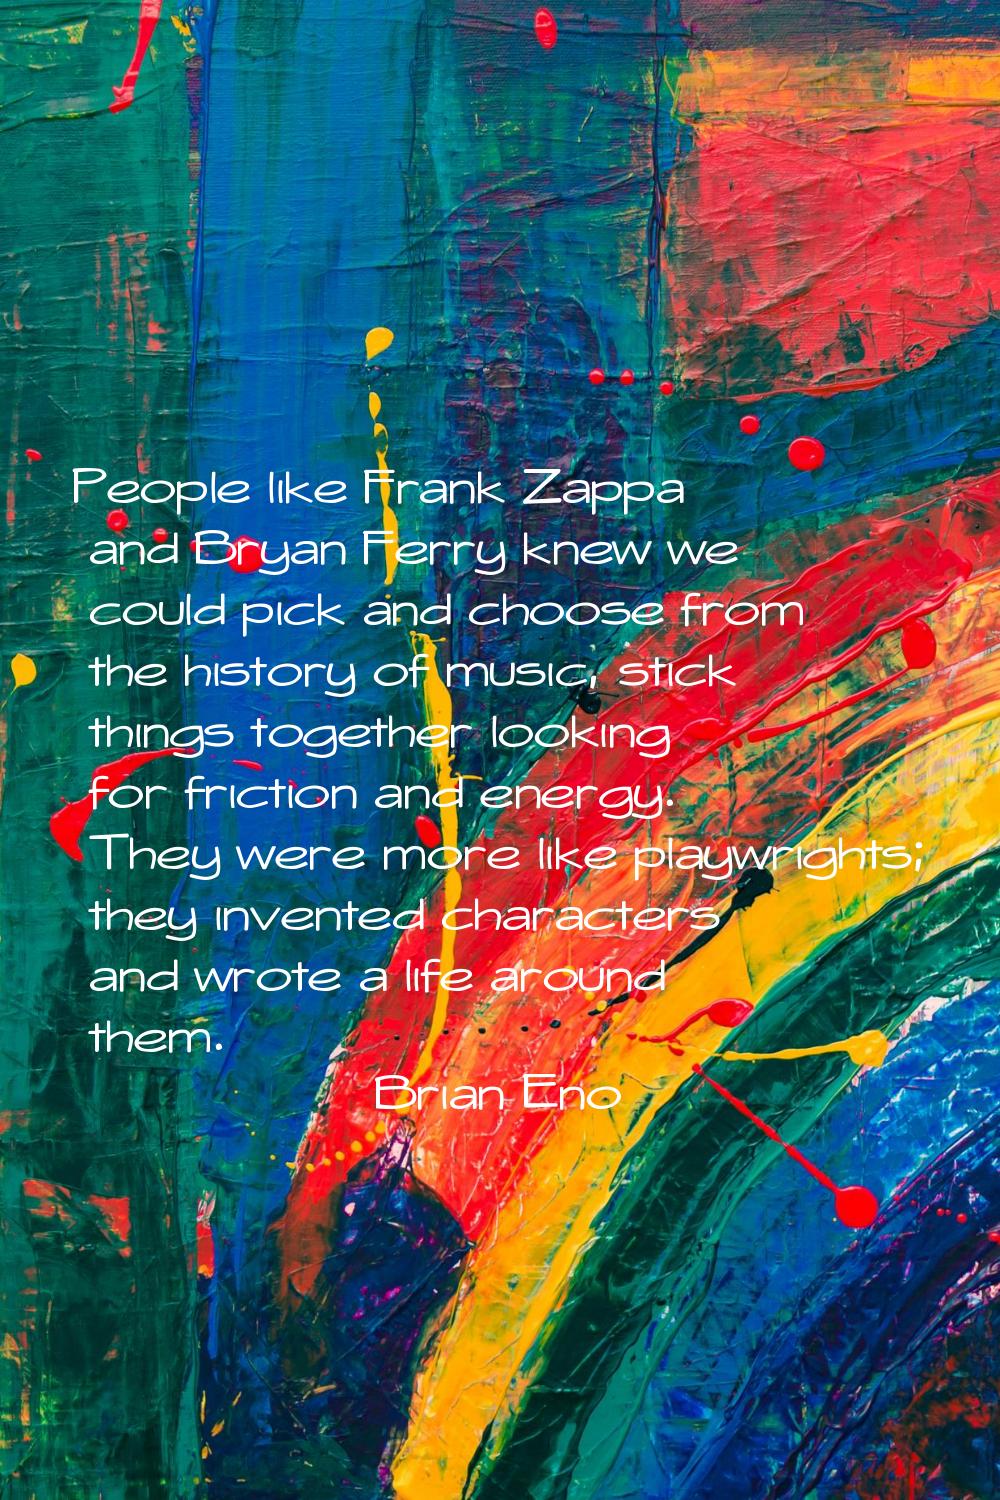 People like Frank Zappa and Bryan Ferry knew we could pick and choose from the history of music, st